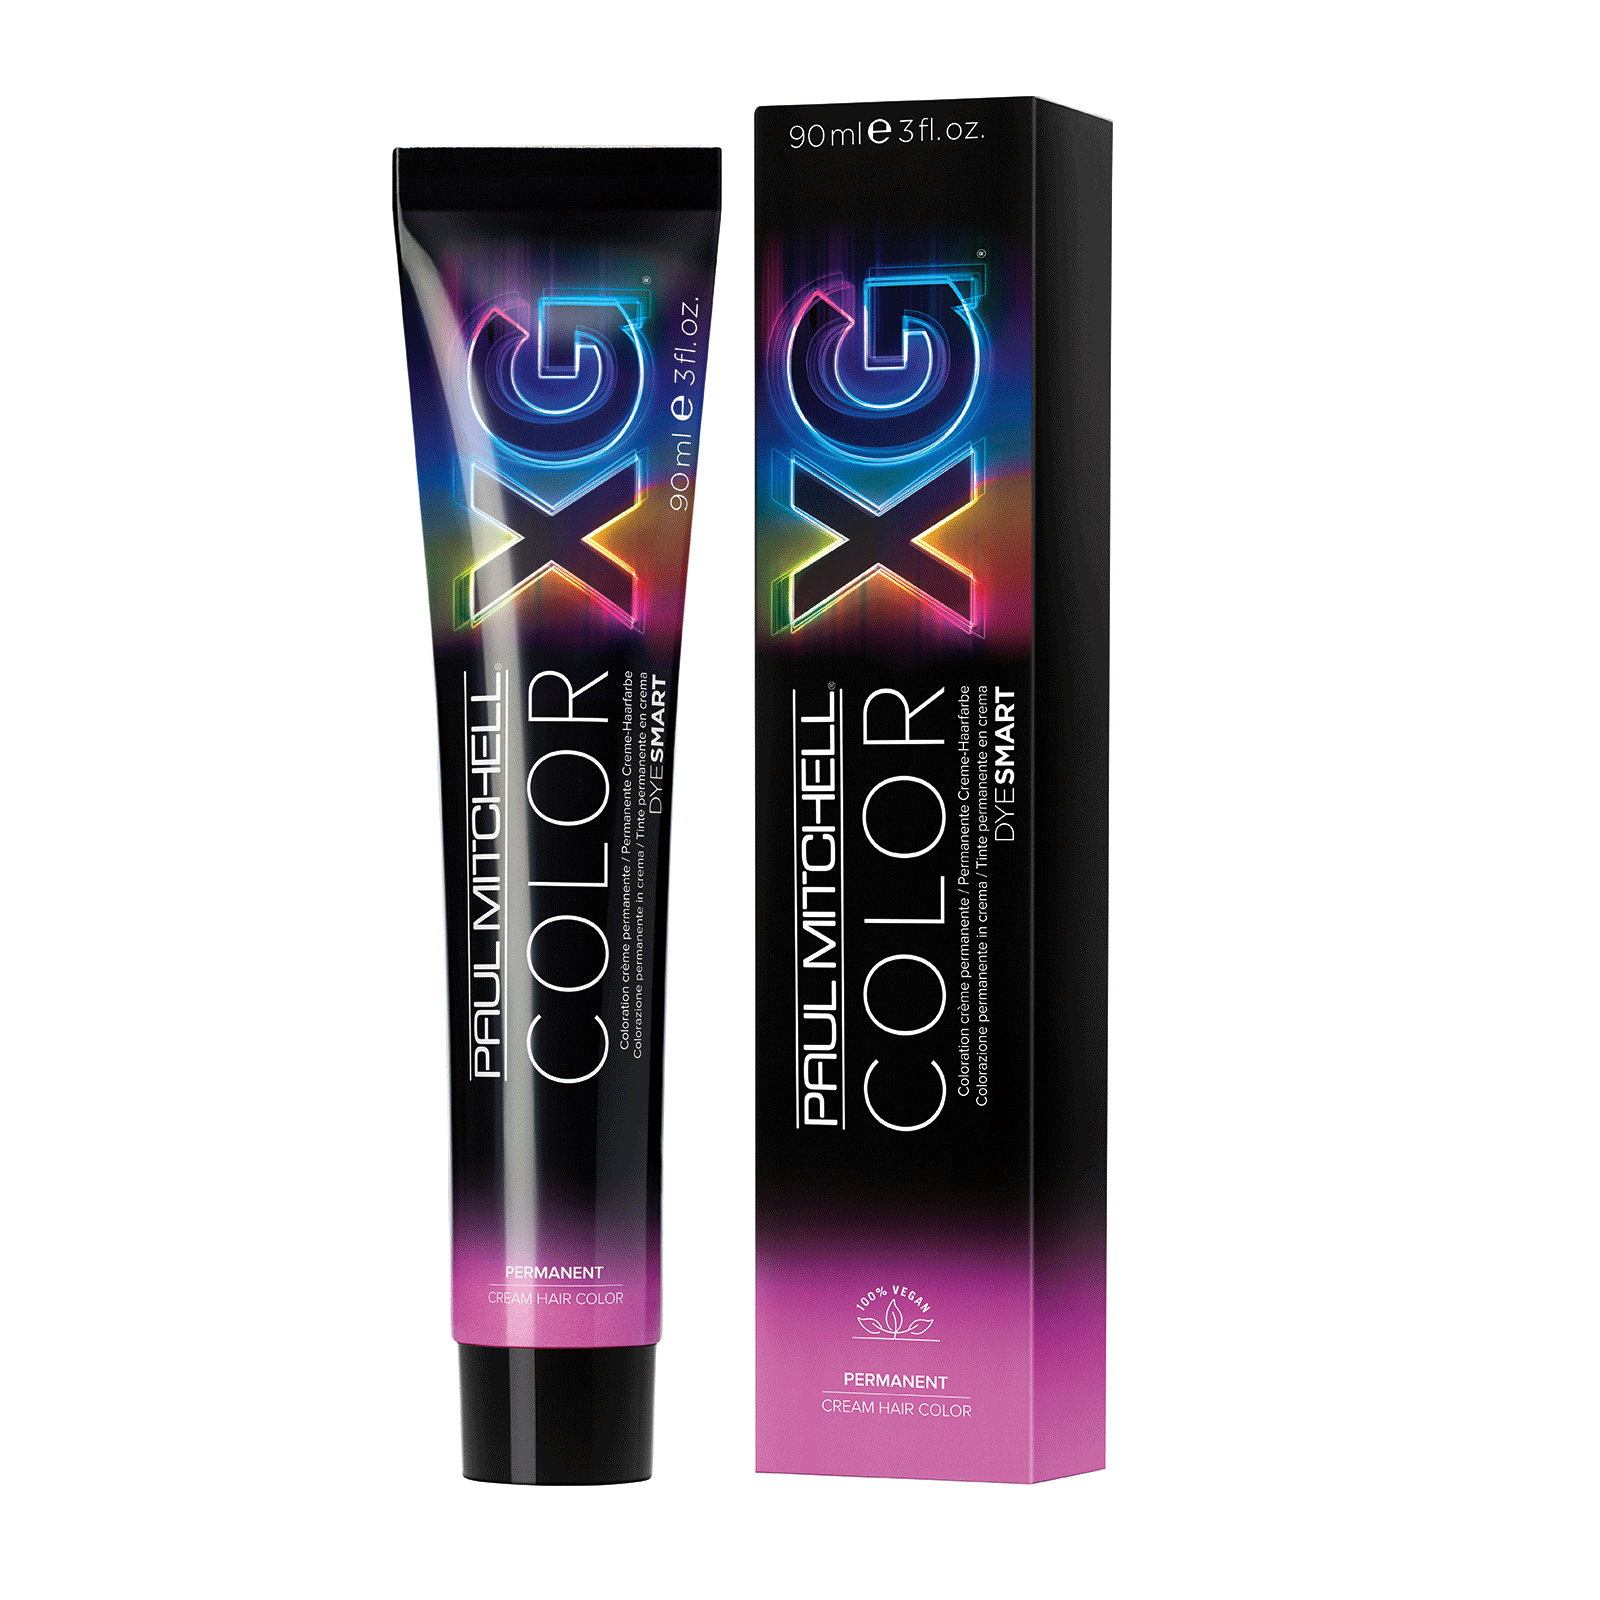 Paul Mitchell The Color XG Professional Permanent Cream Hair Color Natural/Natural Level 3oz / 90ml